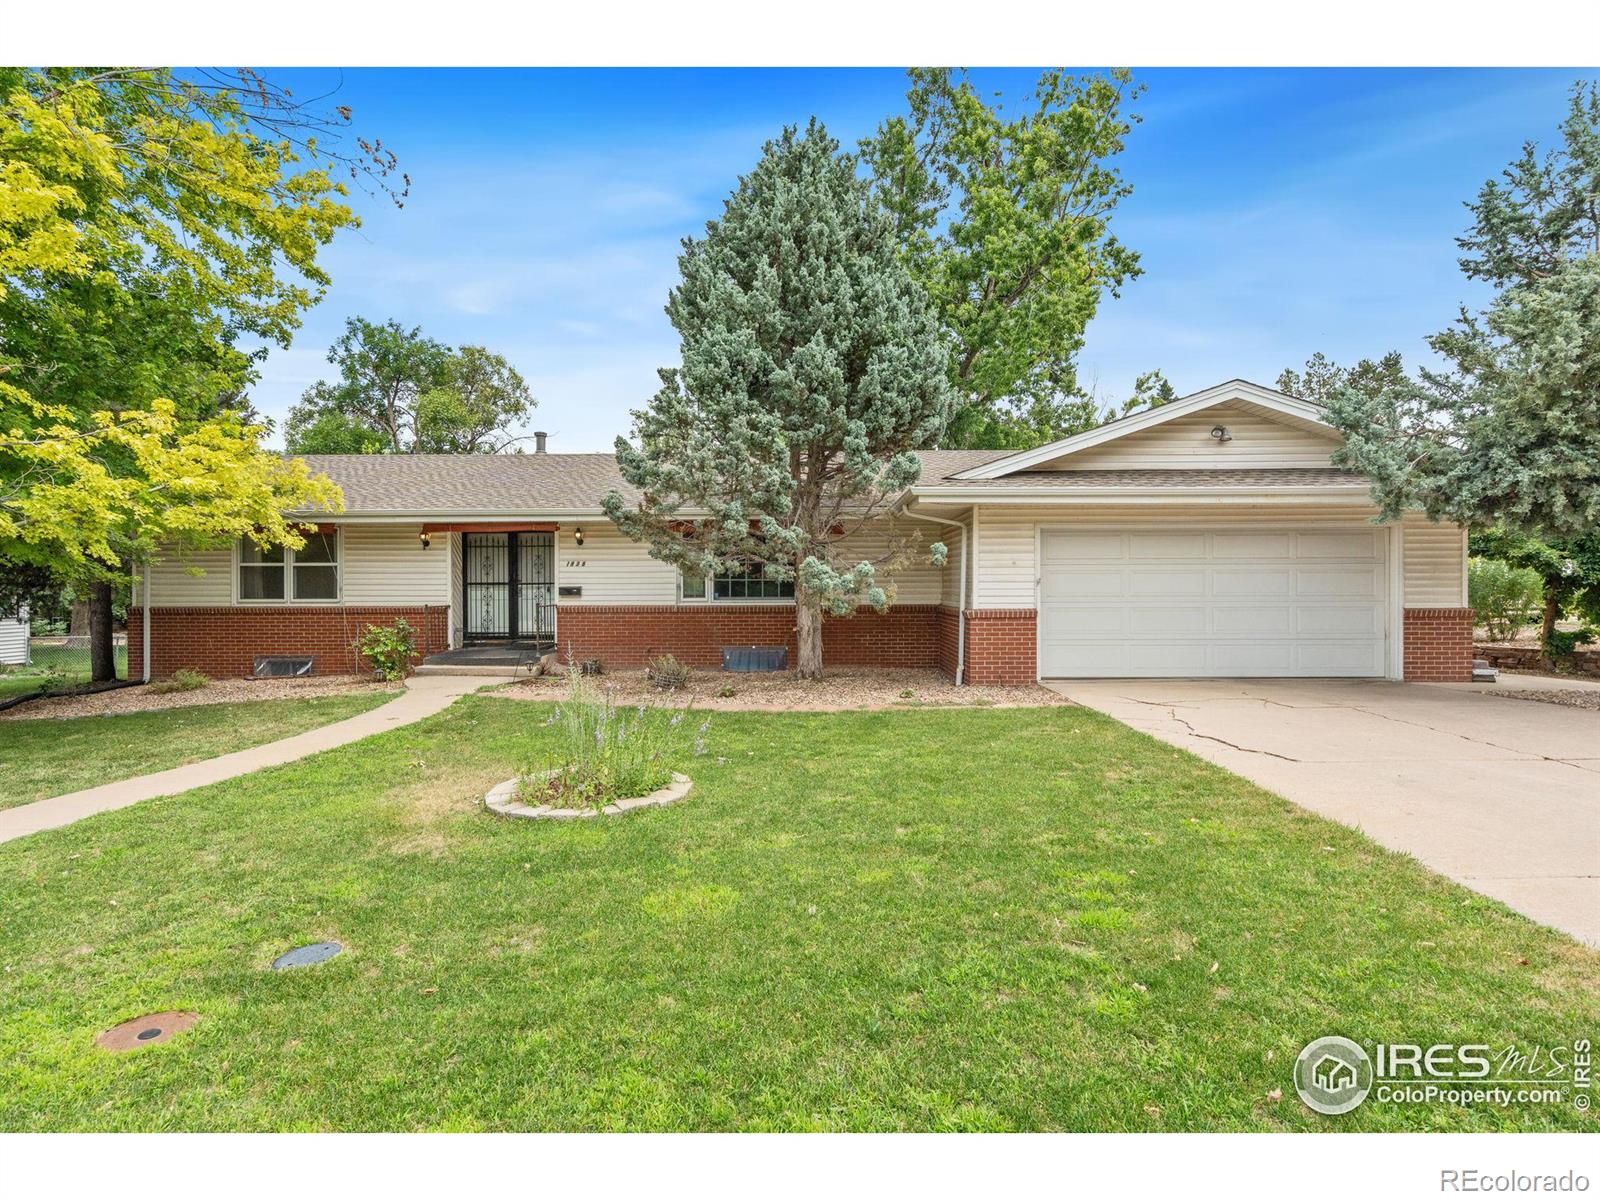 1926  21st Avenue, greeley MLS: 4567891014687 Beds: 4 Baths: 3 Price: $450,000